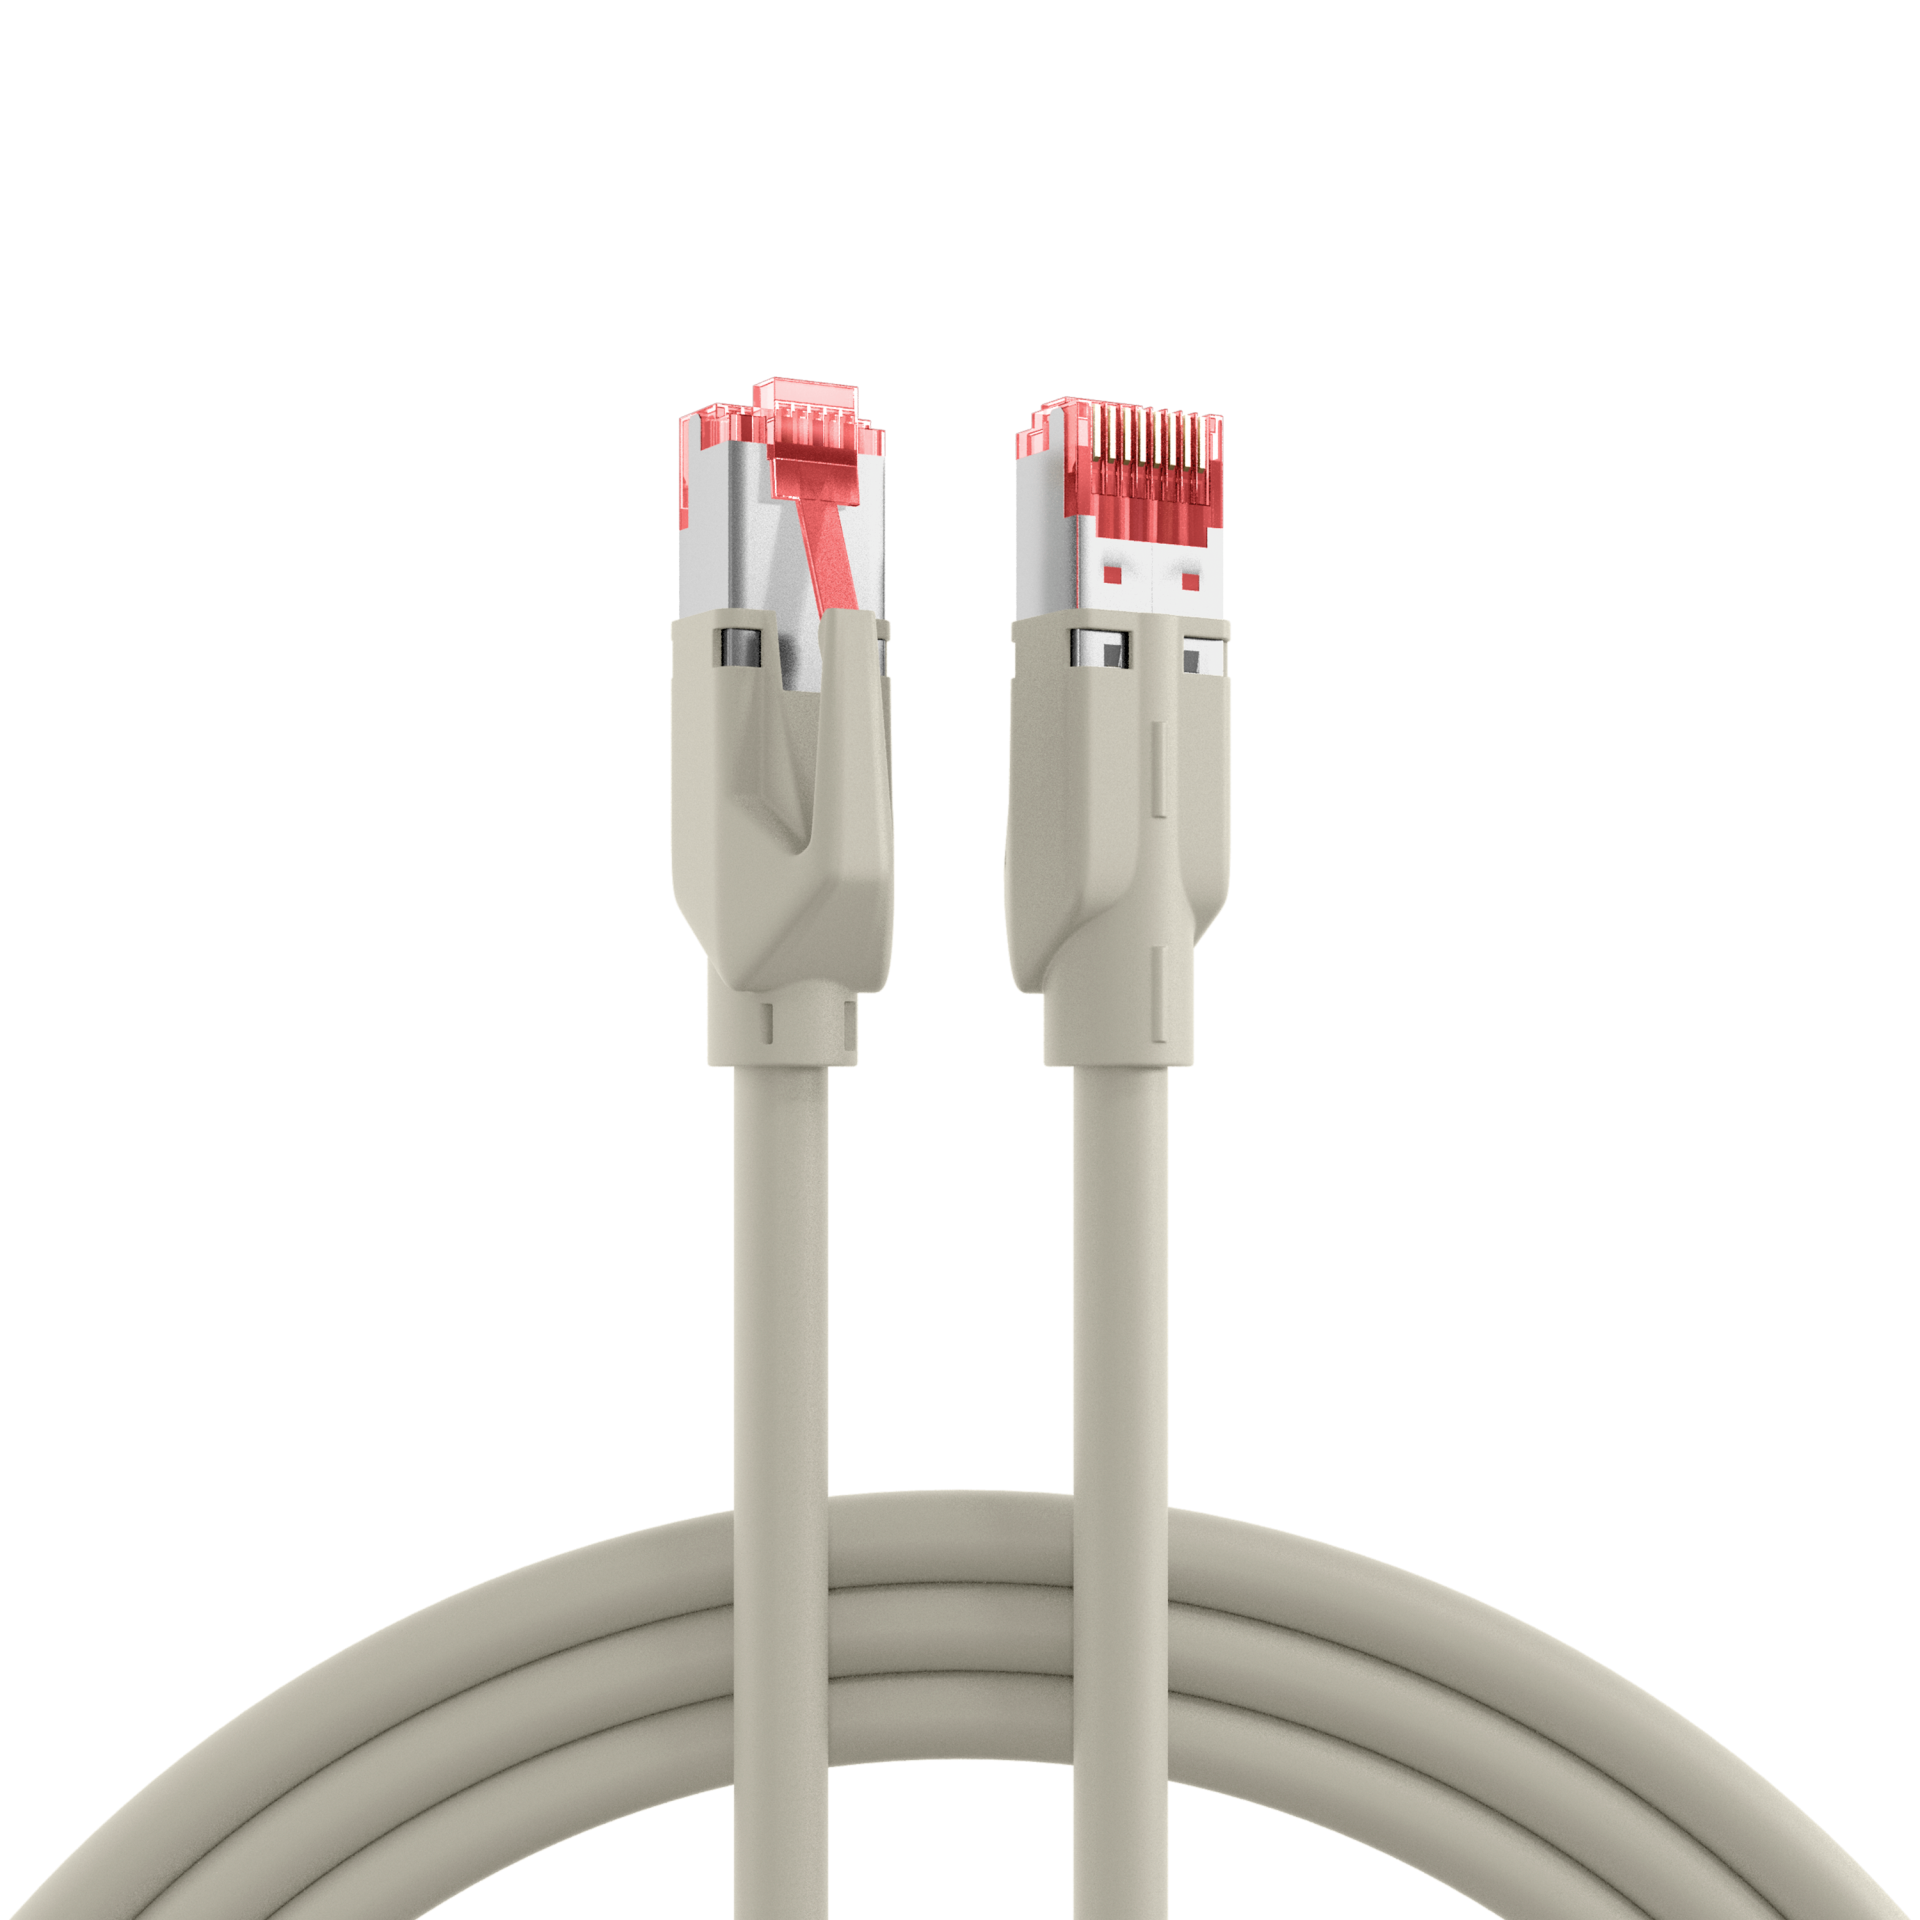 RJ45 Crossover Patch cable S/FTP, Cat.6, TM21, UC900, 0,5m, grey